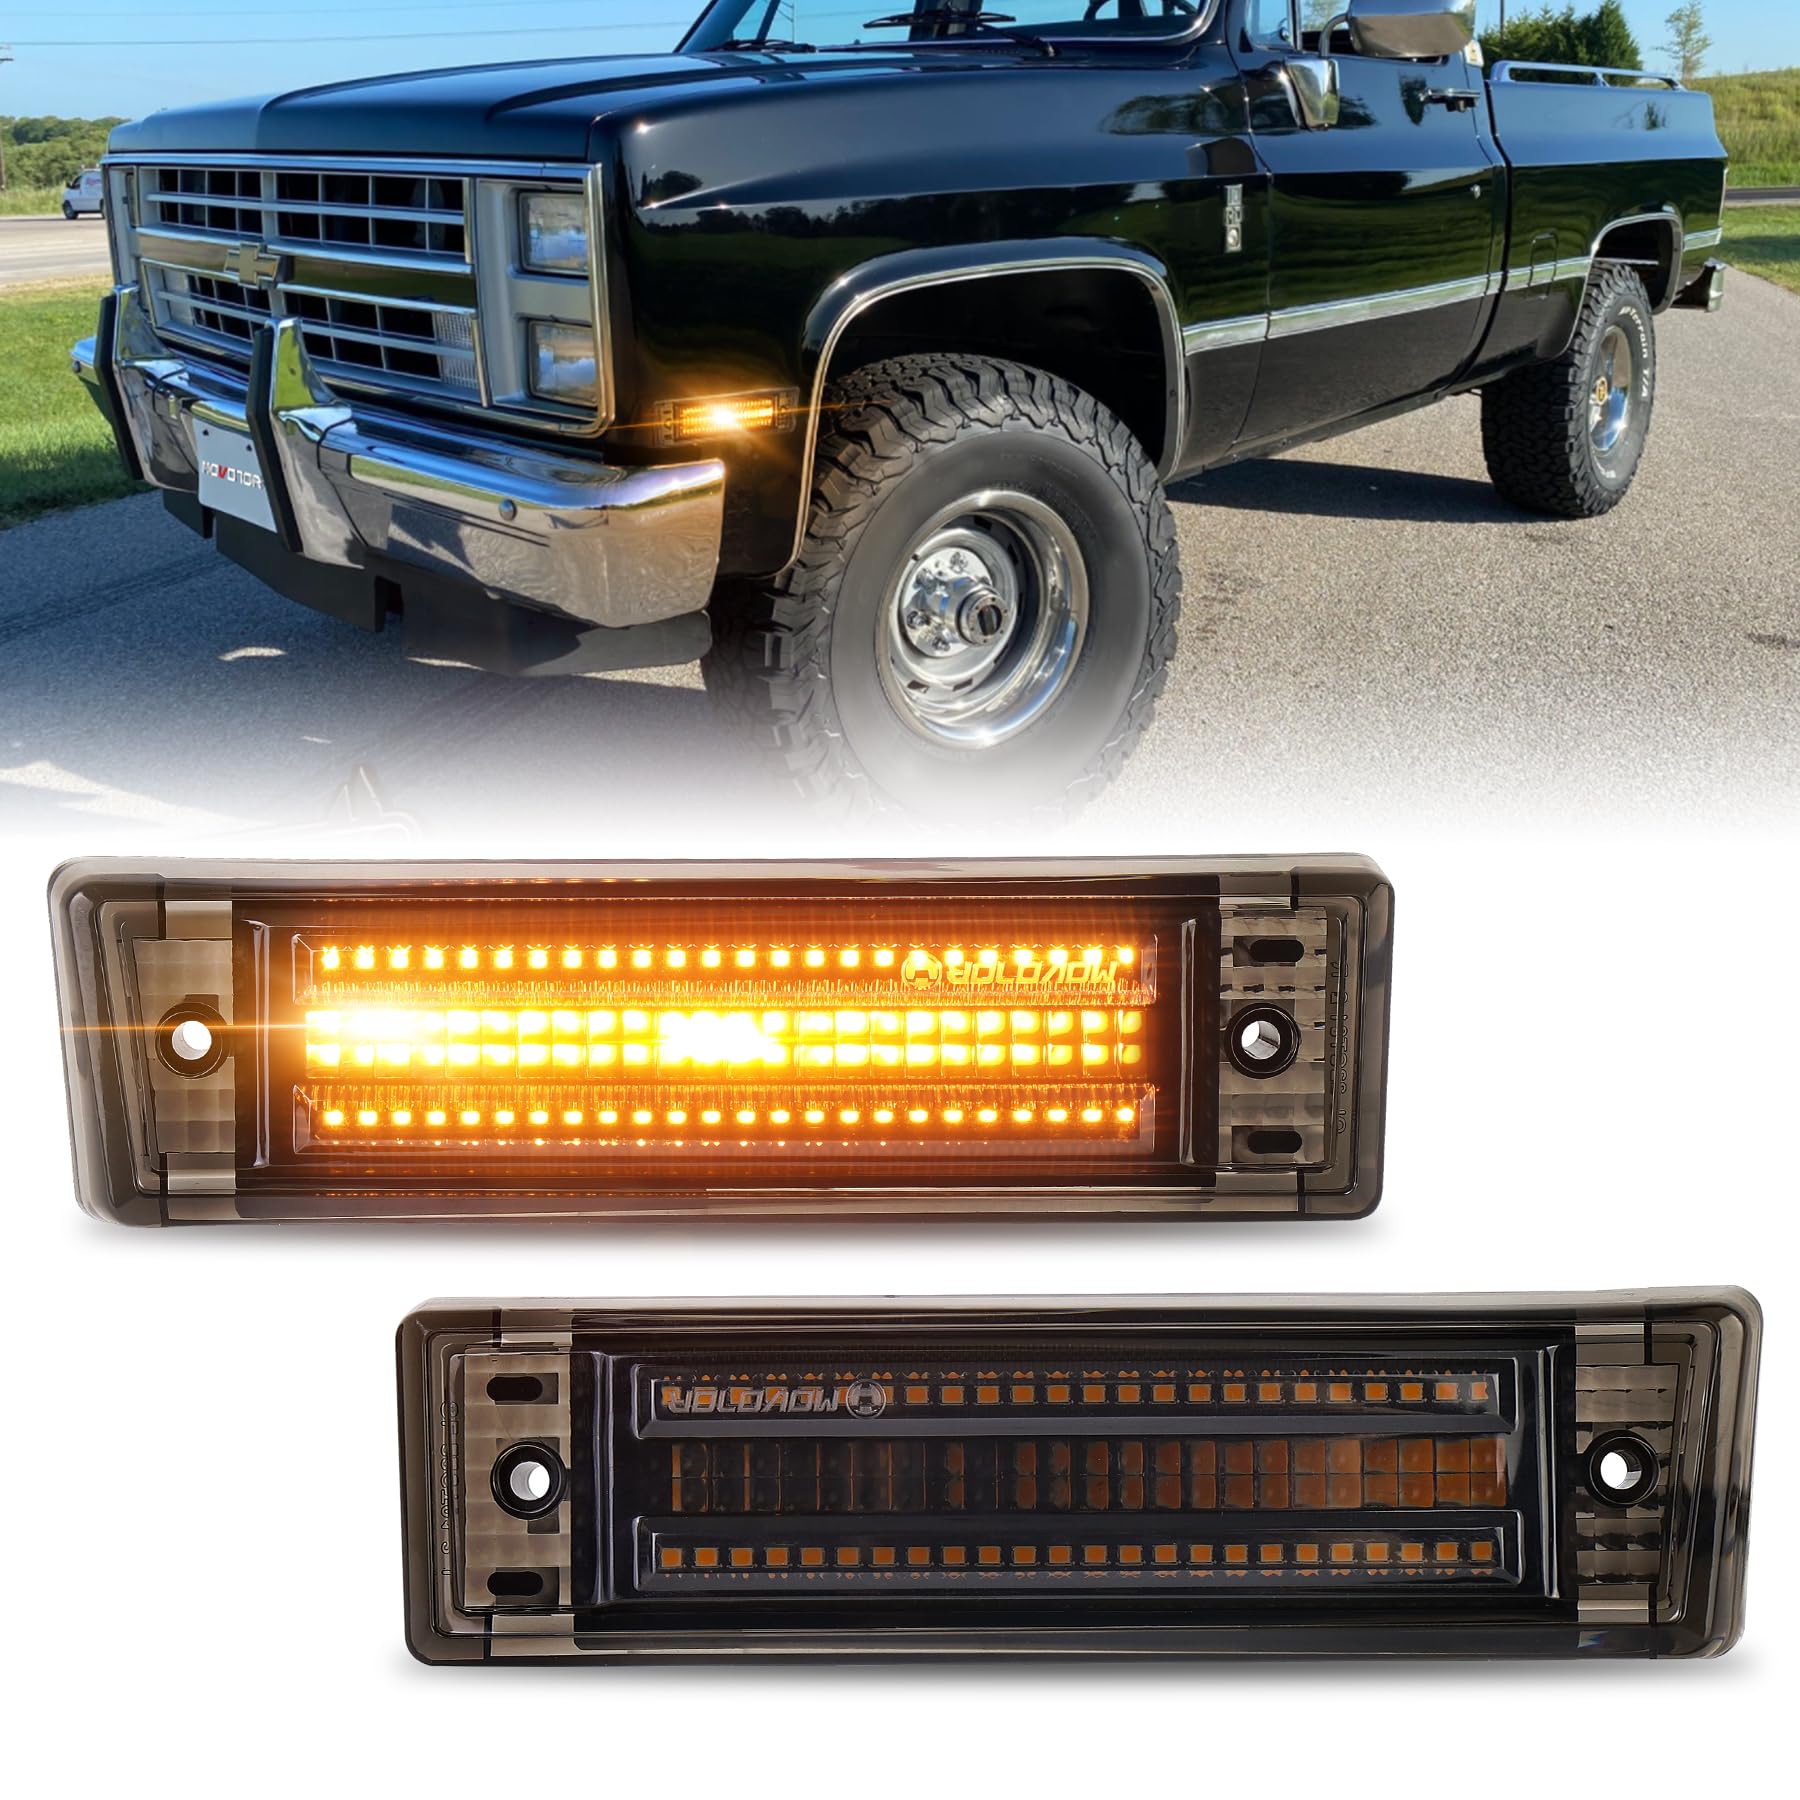 MOVOTOR Chevy Led Side Marker Lights 500% Bright Smoked Lens Fender Side Marker Compatible with 1981-1991 Chevy C10 C20 C30 GMC C1500 C2500 Suburban Blazer Jimmy